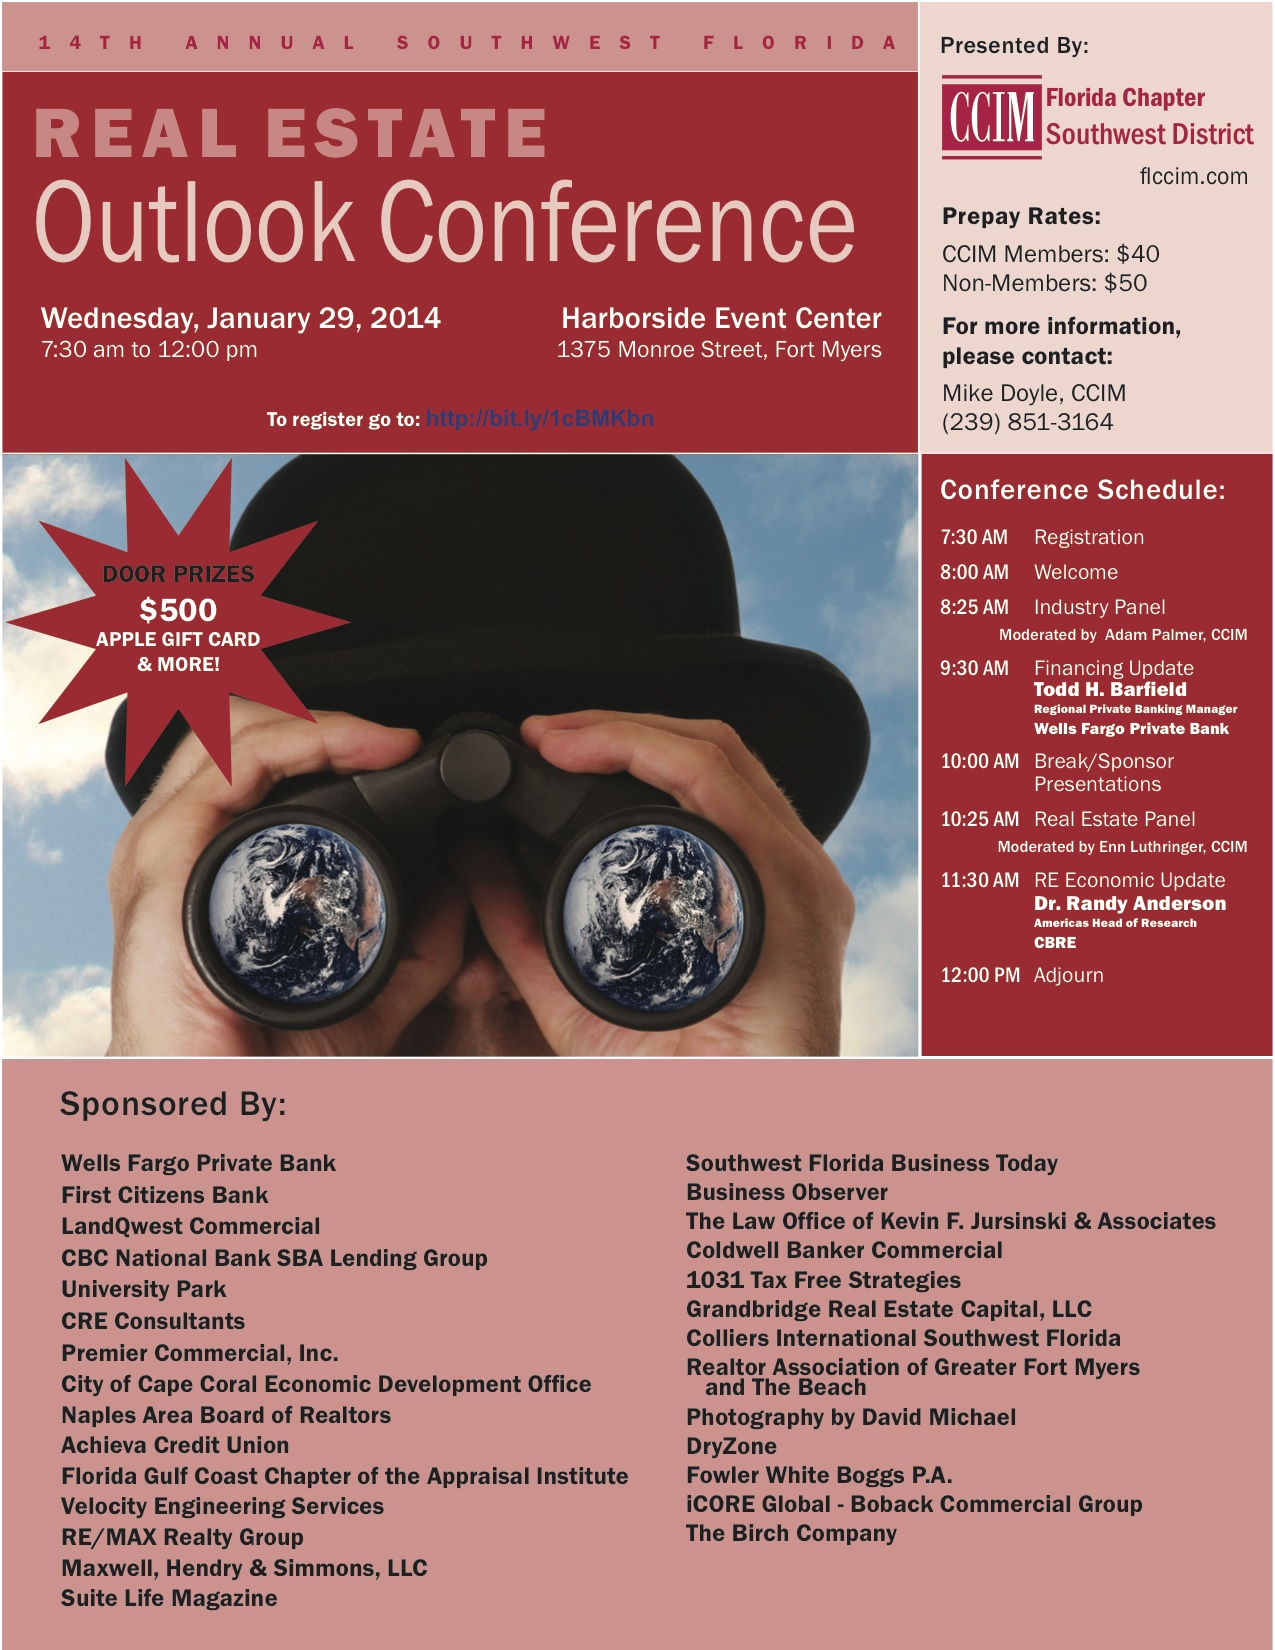 The 14th Annual Southwest Florida Real Estate Outlook Conference is Tomorrow